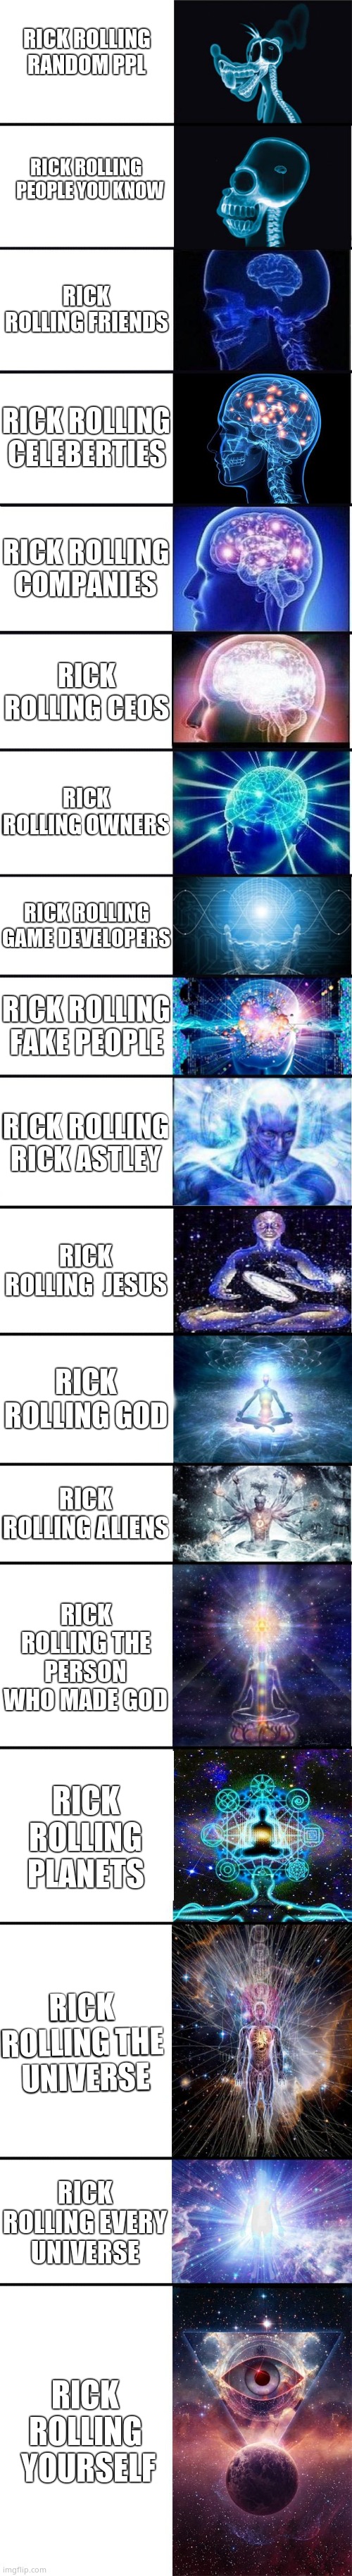 Rick Roll meme | RICK ROLLING RANDOM PPL; RICK ROLLING   PEOPLE YOU KNOW; RICK ROLLING FRIENDS; RICK ROLLING CELEBERTIES; RICK ROLLING COMPANIES; RICK ROLLING CEOS; RICK ROLLING OWNERS; RICK ROLLING GAME DEVELOPERS; RICK ROLLING FAKE PEOPLE; RICK ROLLING RICK ASTLEY; RICK ROLLING  JESUS; RICK ROLLING GOD; RICK ROLLING ALIENS; RICK ROLLING THE PERSON WHO MADE GOD; RICK ROLLING PLANETS; RICK ROLLING THE  UNIVERSE; RICK ROLLING EVERY UNIVERSE; RICK ROLLING  YOURSELF | image tagged in expanding brain 9001 | made w/ Imgflip meme maker